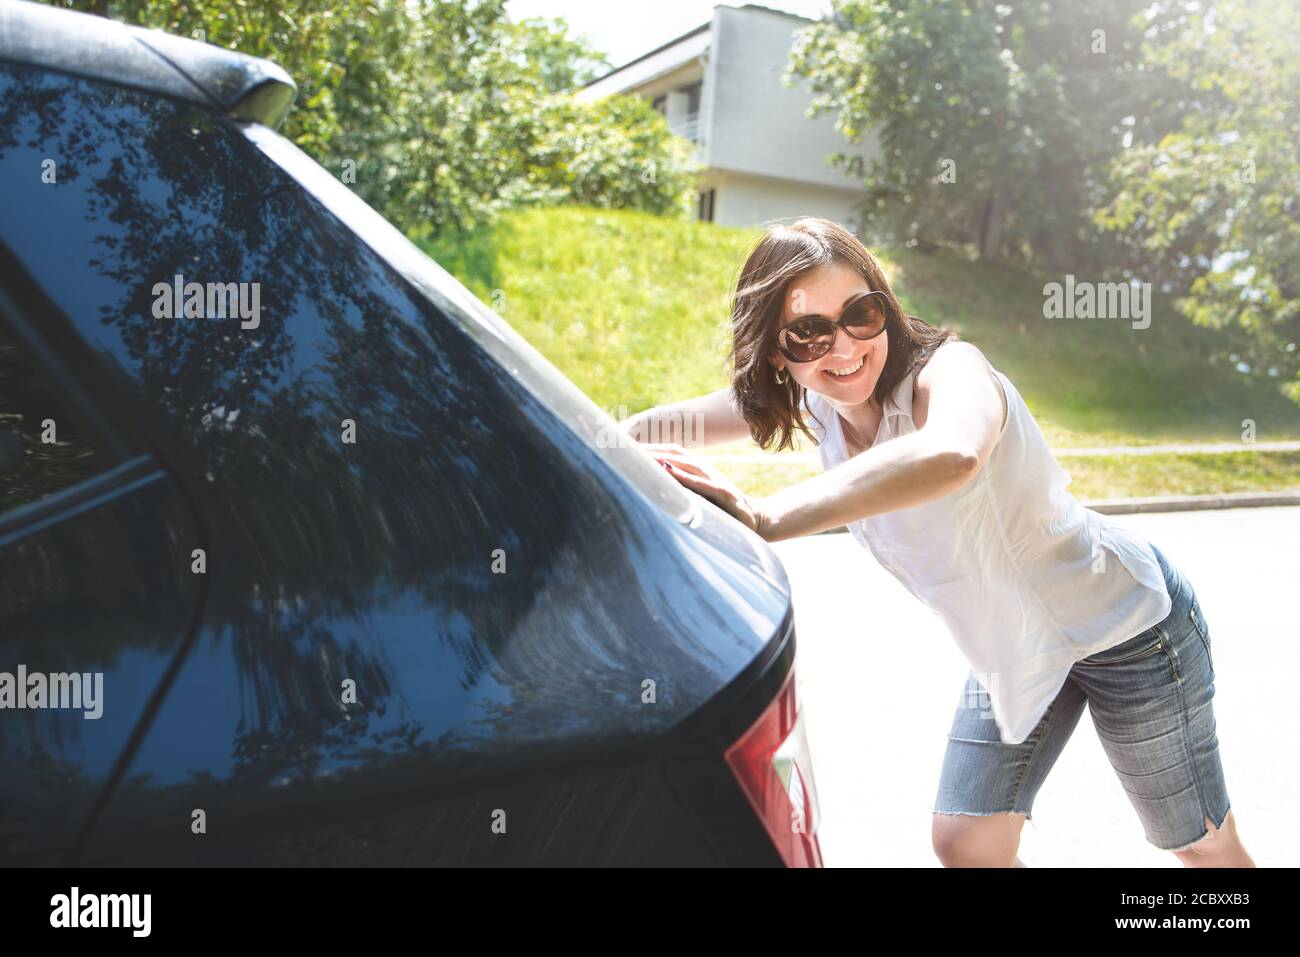 woman pushing broken car while her boyfriend is driving Stock Photo